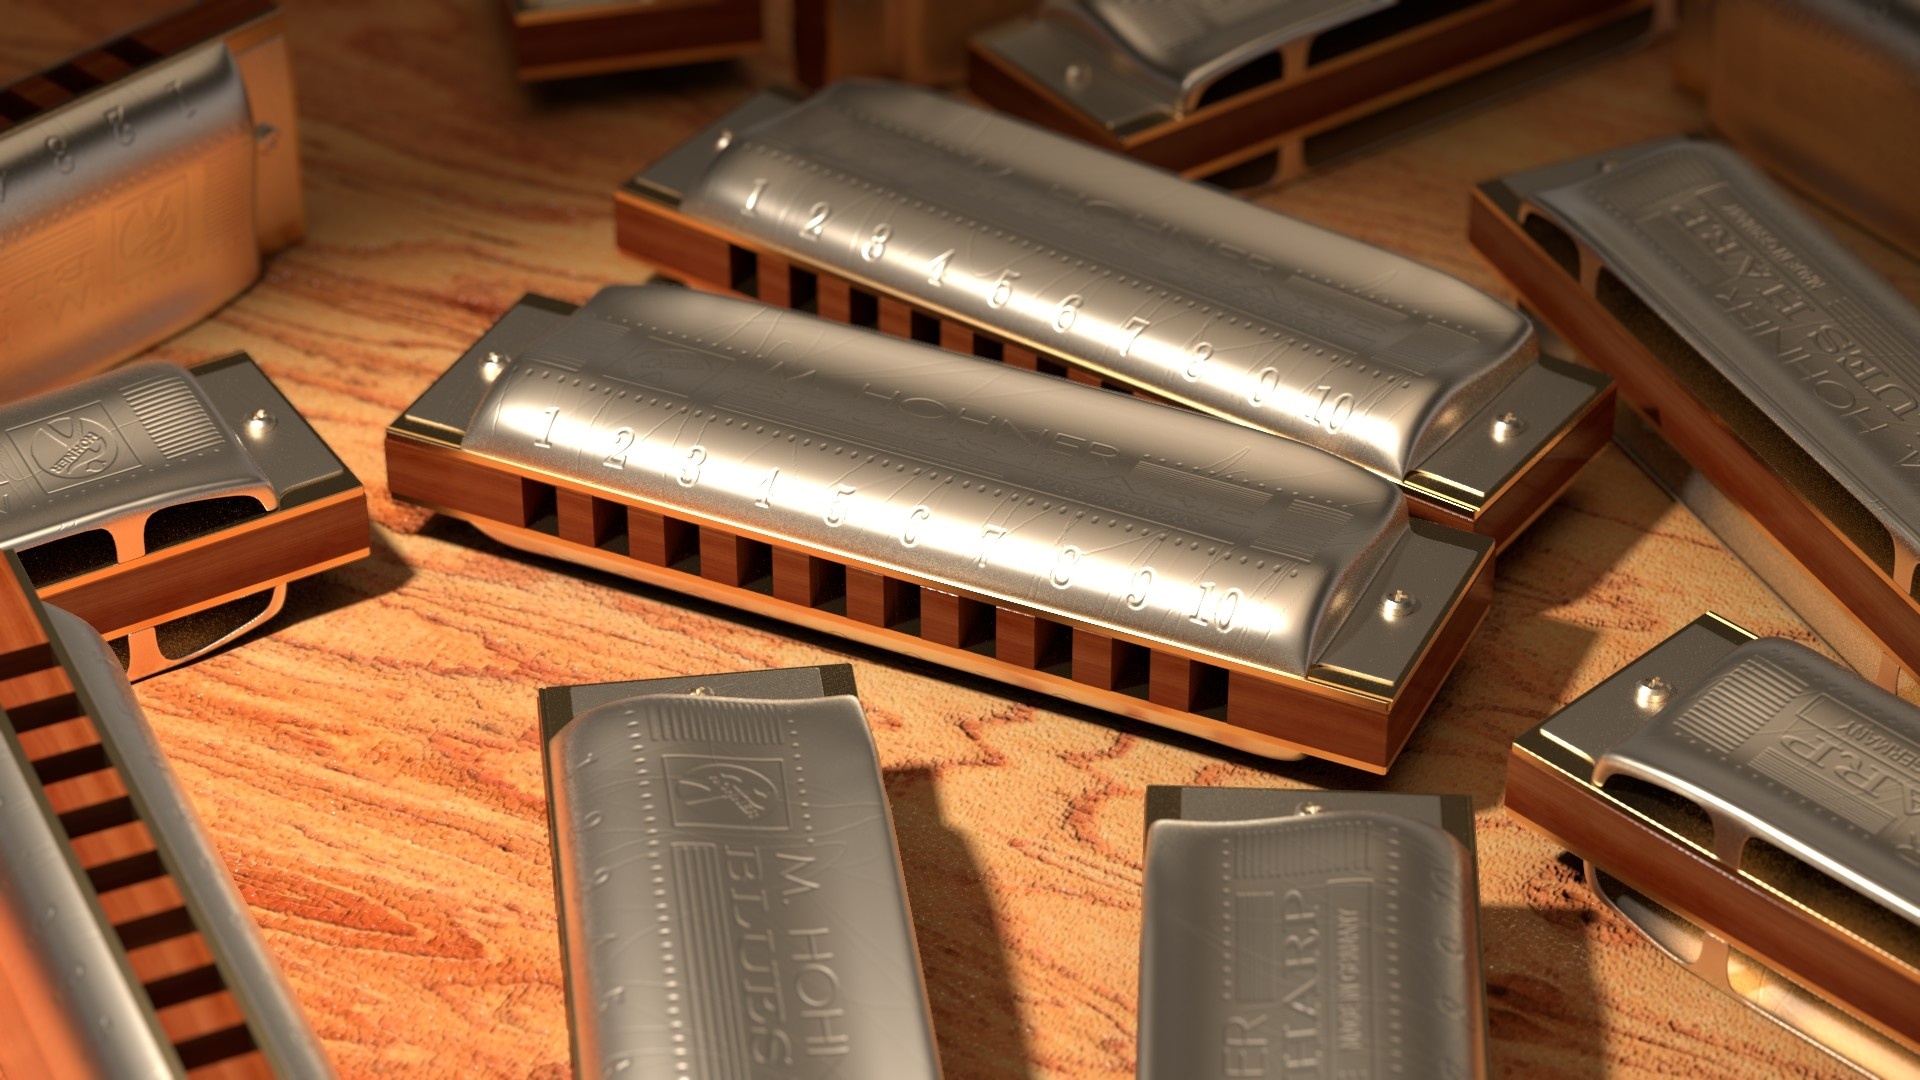 Harmonica: M.Hohner, Blues Harp, Diatonic Richter-Tuned With Ten Air Passages And Twenty Reeds. 1920x1080 Full HD Background.